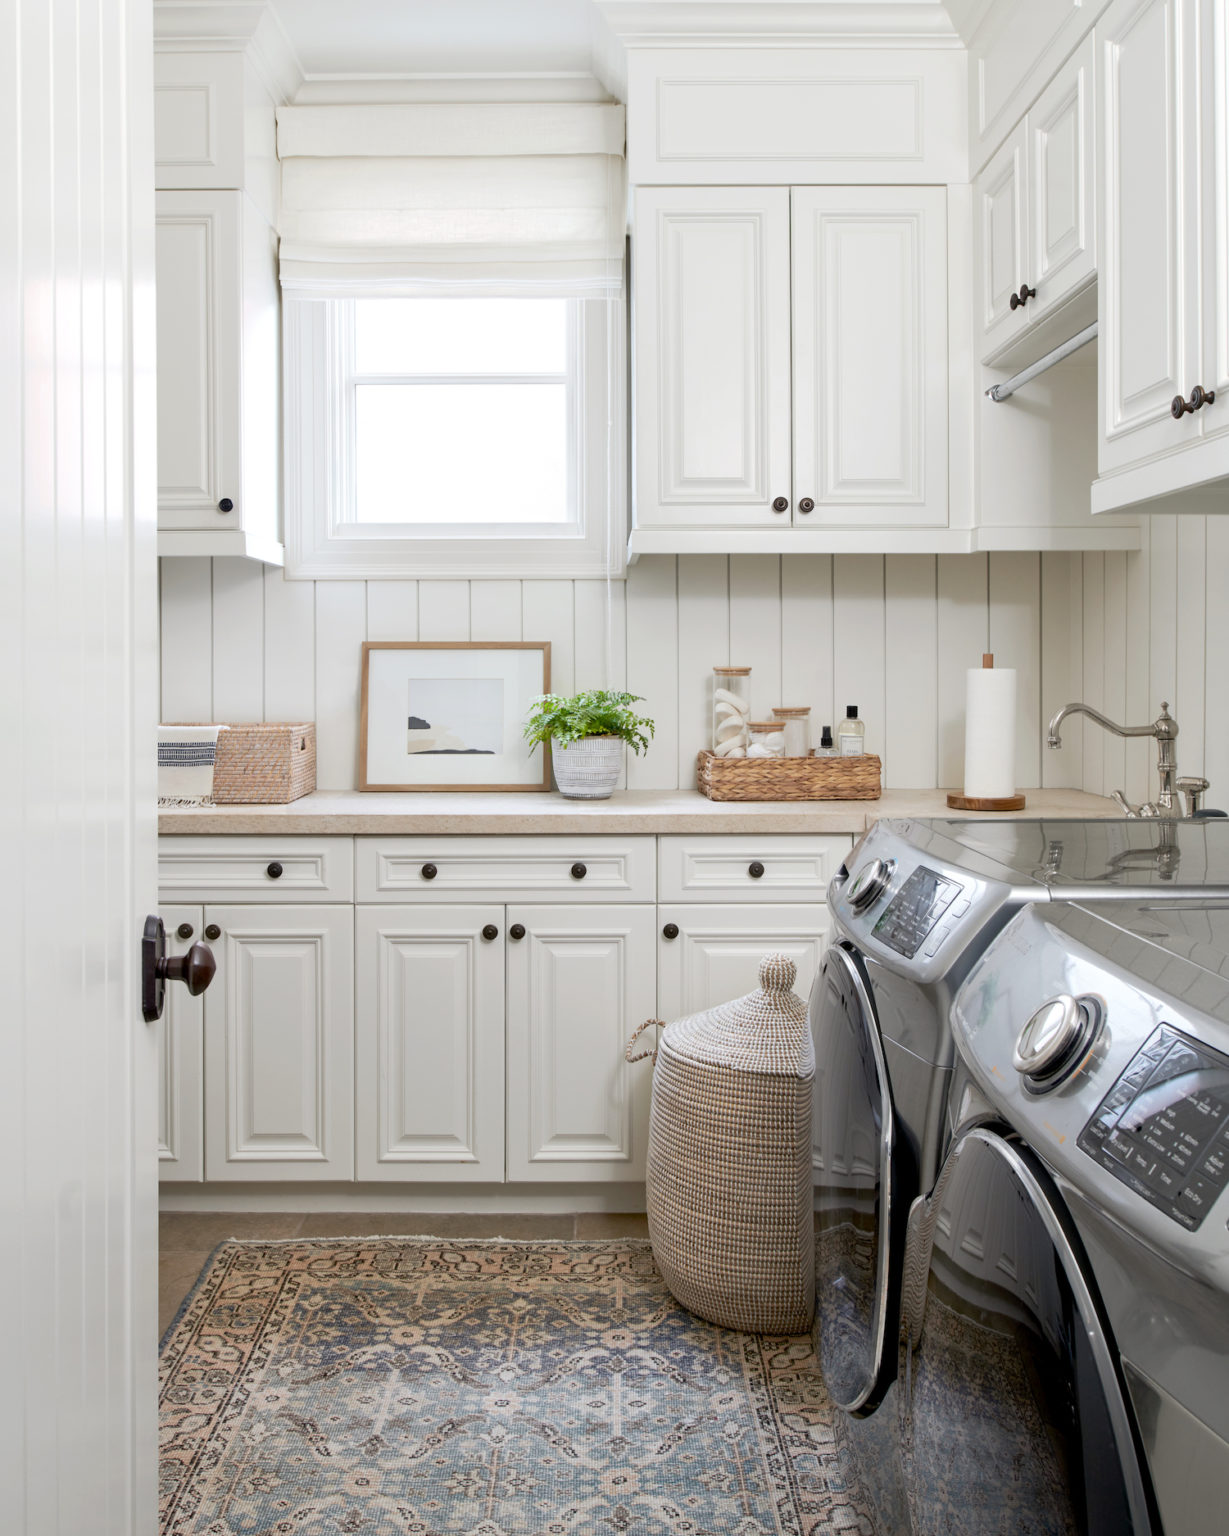 A Classic White Kitchen Graces This Timeless Manhattan Beach Home - Haven